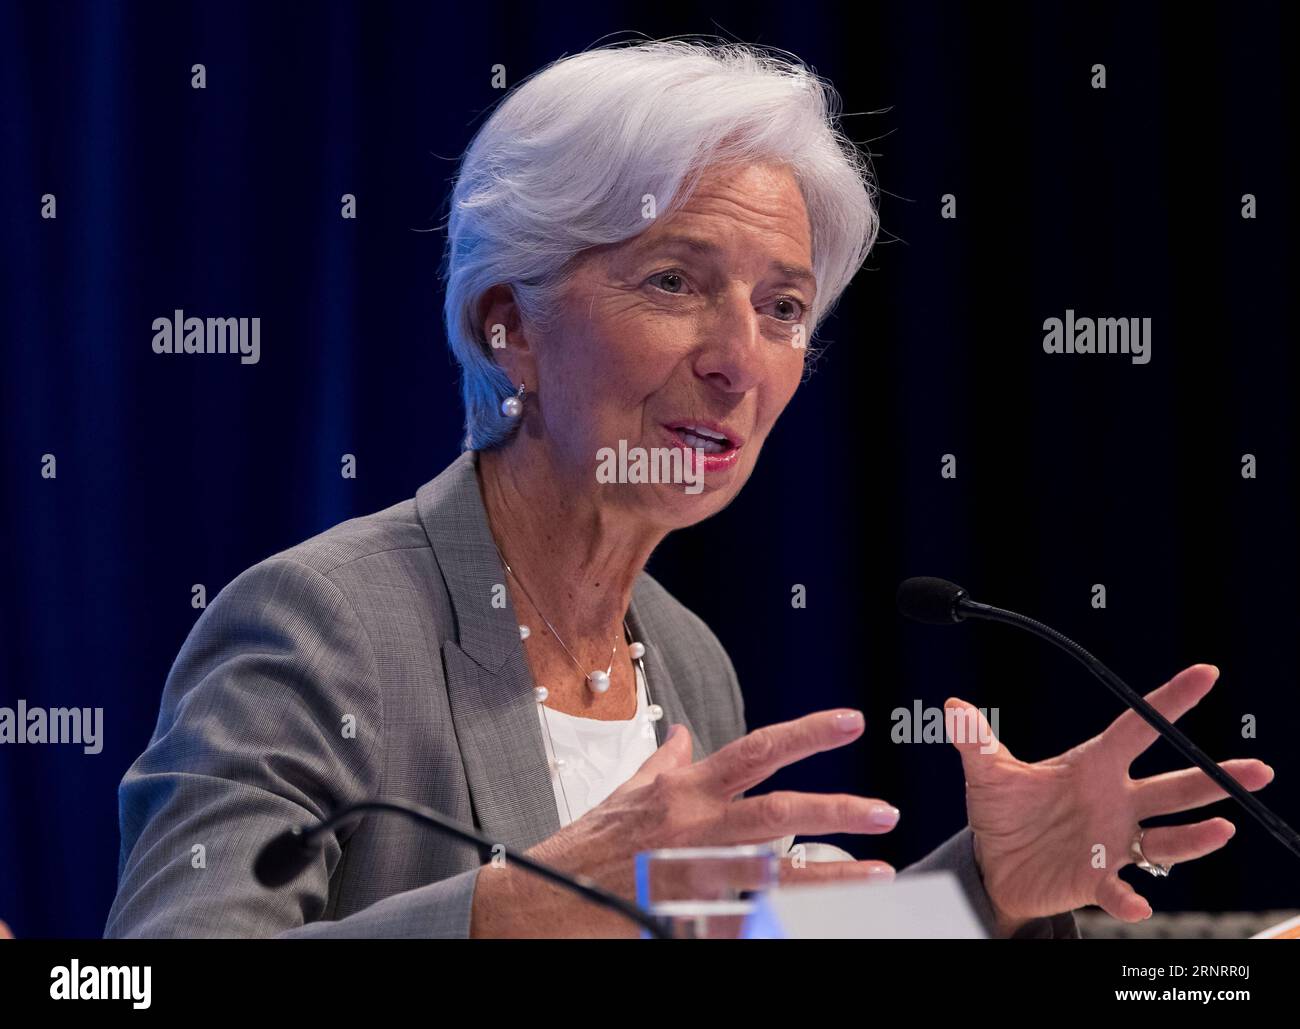 (171012) -- WASHINGTON, Oct. 12, 2017 -- International Monetary Fund (IMF) Managing Director Christine Lagarde attends a press conference of the 2017 International Monetary Fund and World Bank annual meetings in Washington D.C., the United States, on Oct. 12, 2017. Christine Lagarde said Thursday that the IMF upgraded China s economic outlook in 2017 and 2018 in view of its fiscal stimulus. ) U.S.-WASHINGTON D.C.-WORLD BANK-IMF-ANNUAL MEETINGS-PRESS CONFERENCE-LAGARDE TingxShen PUBLICATIONxNOTxINxCHN Stock Photo